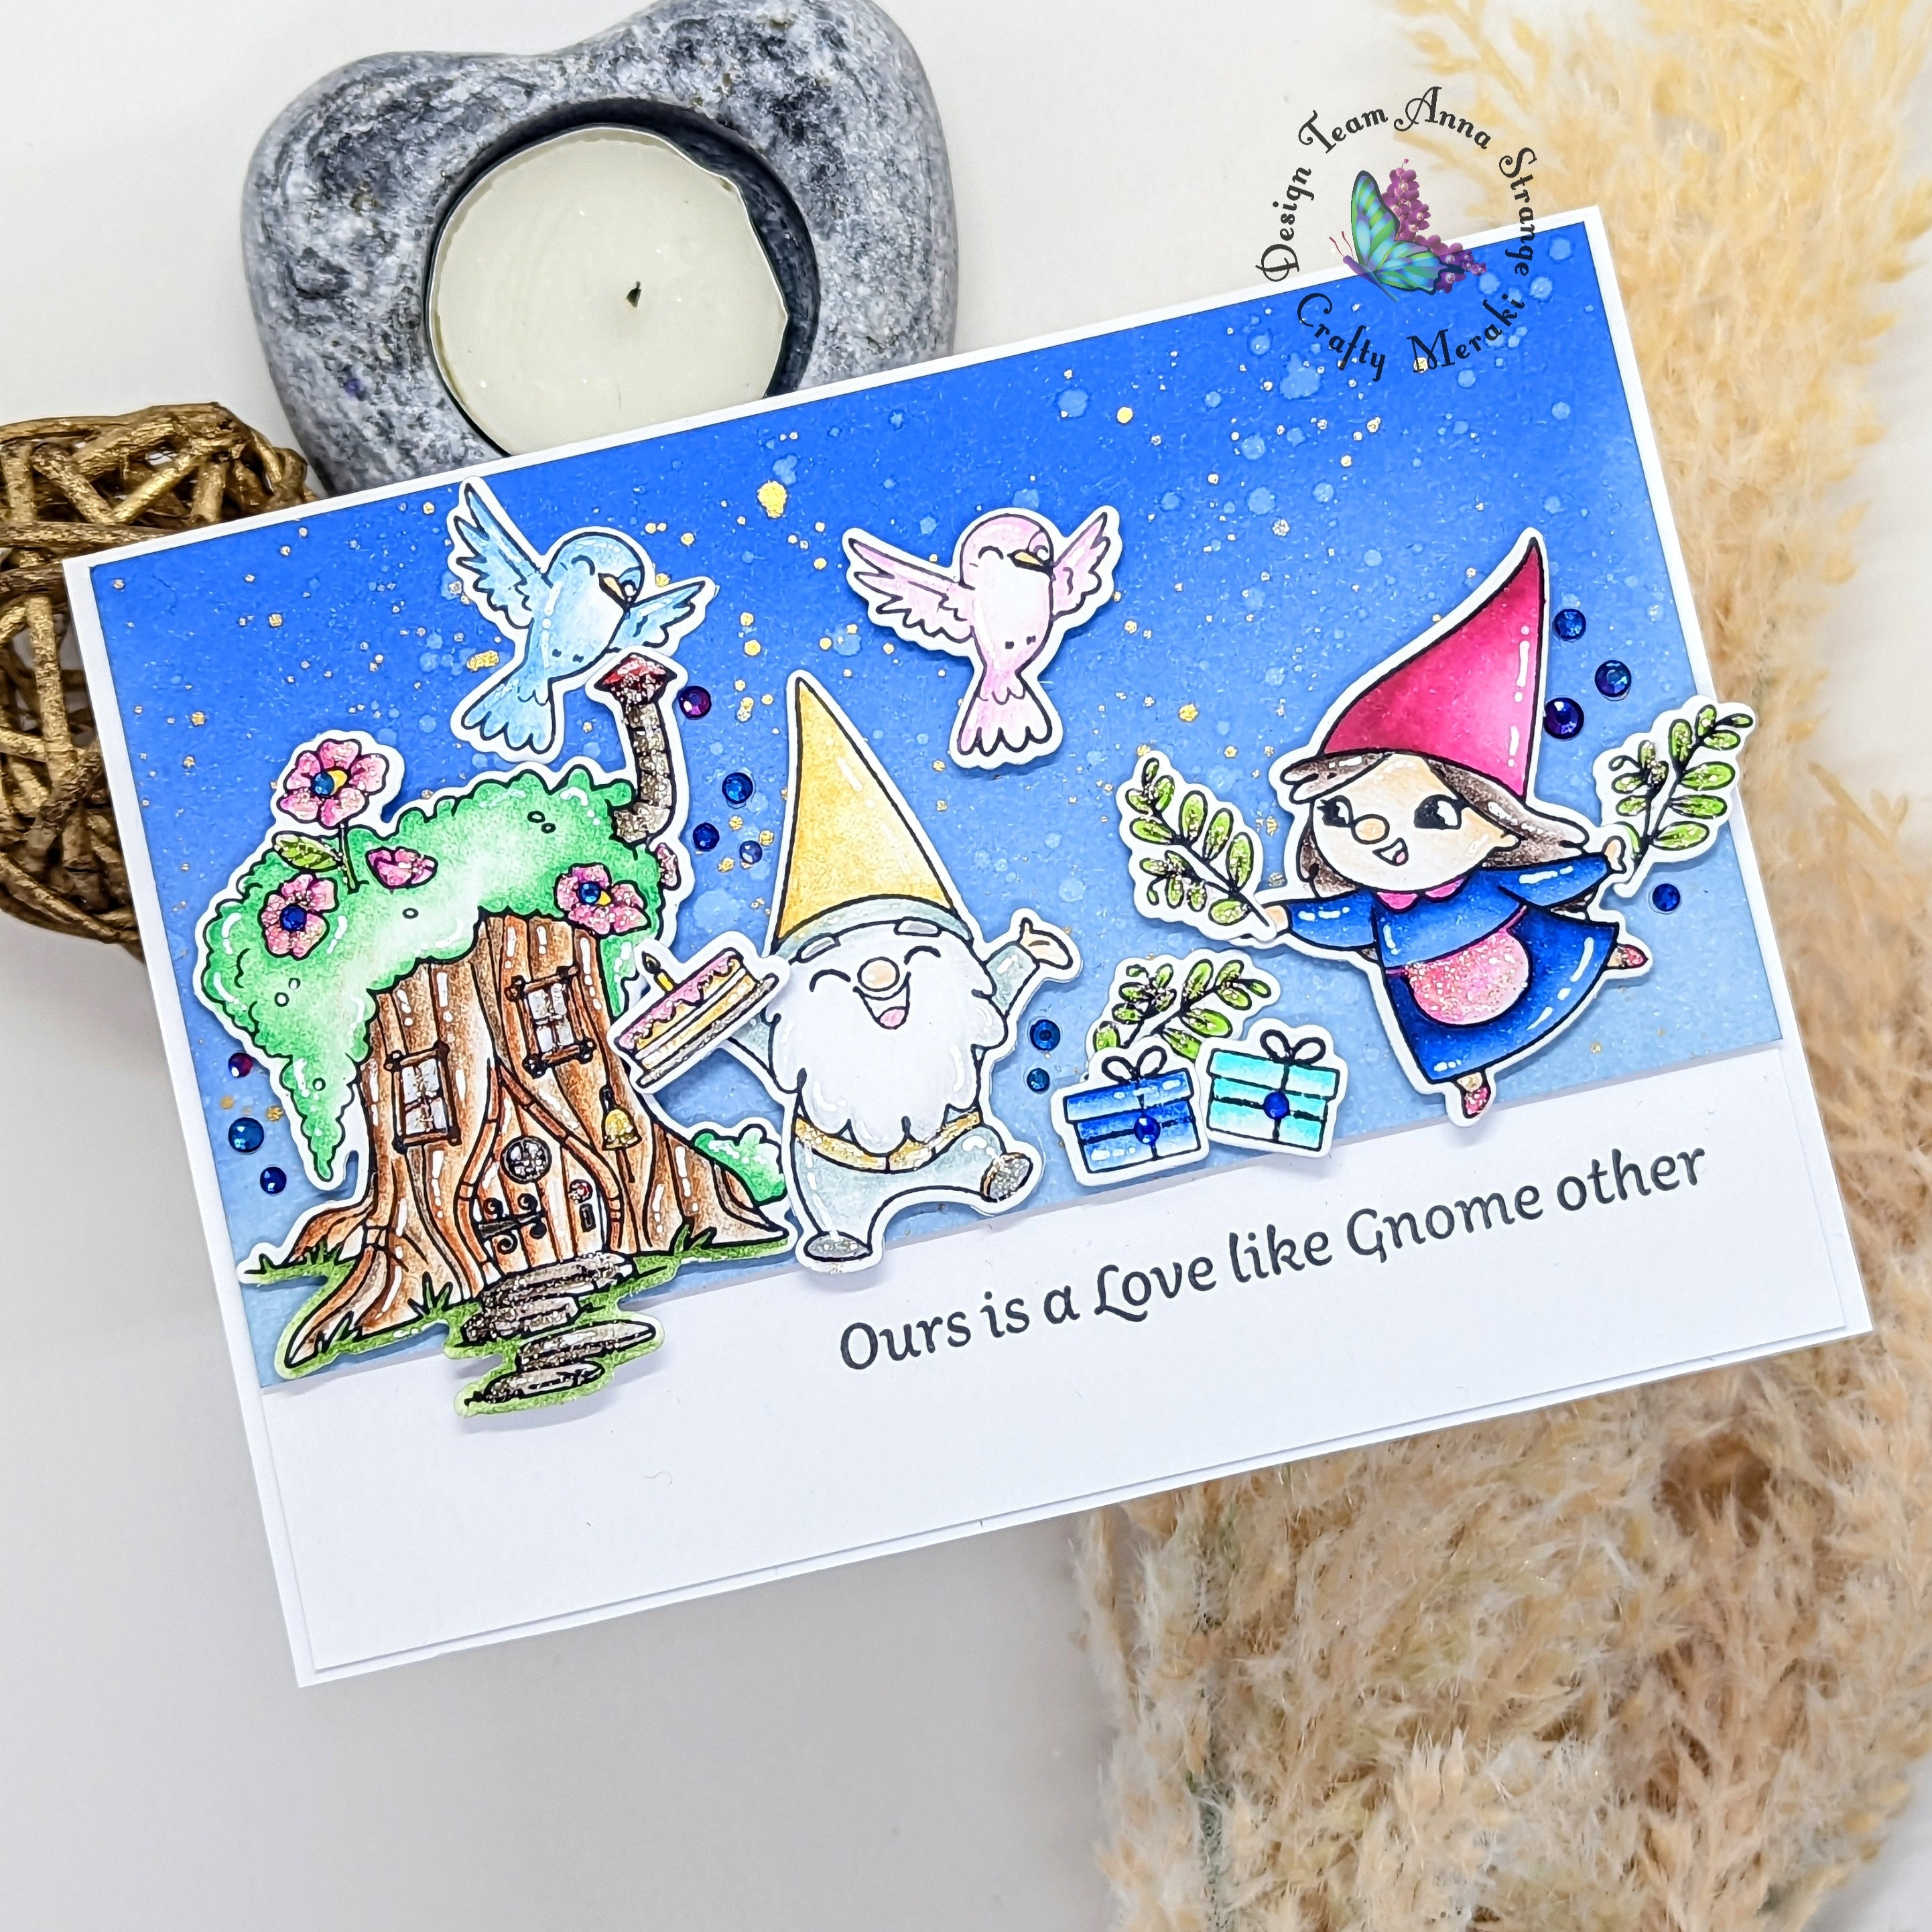 Love card with Gnomes by Anna